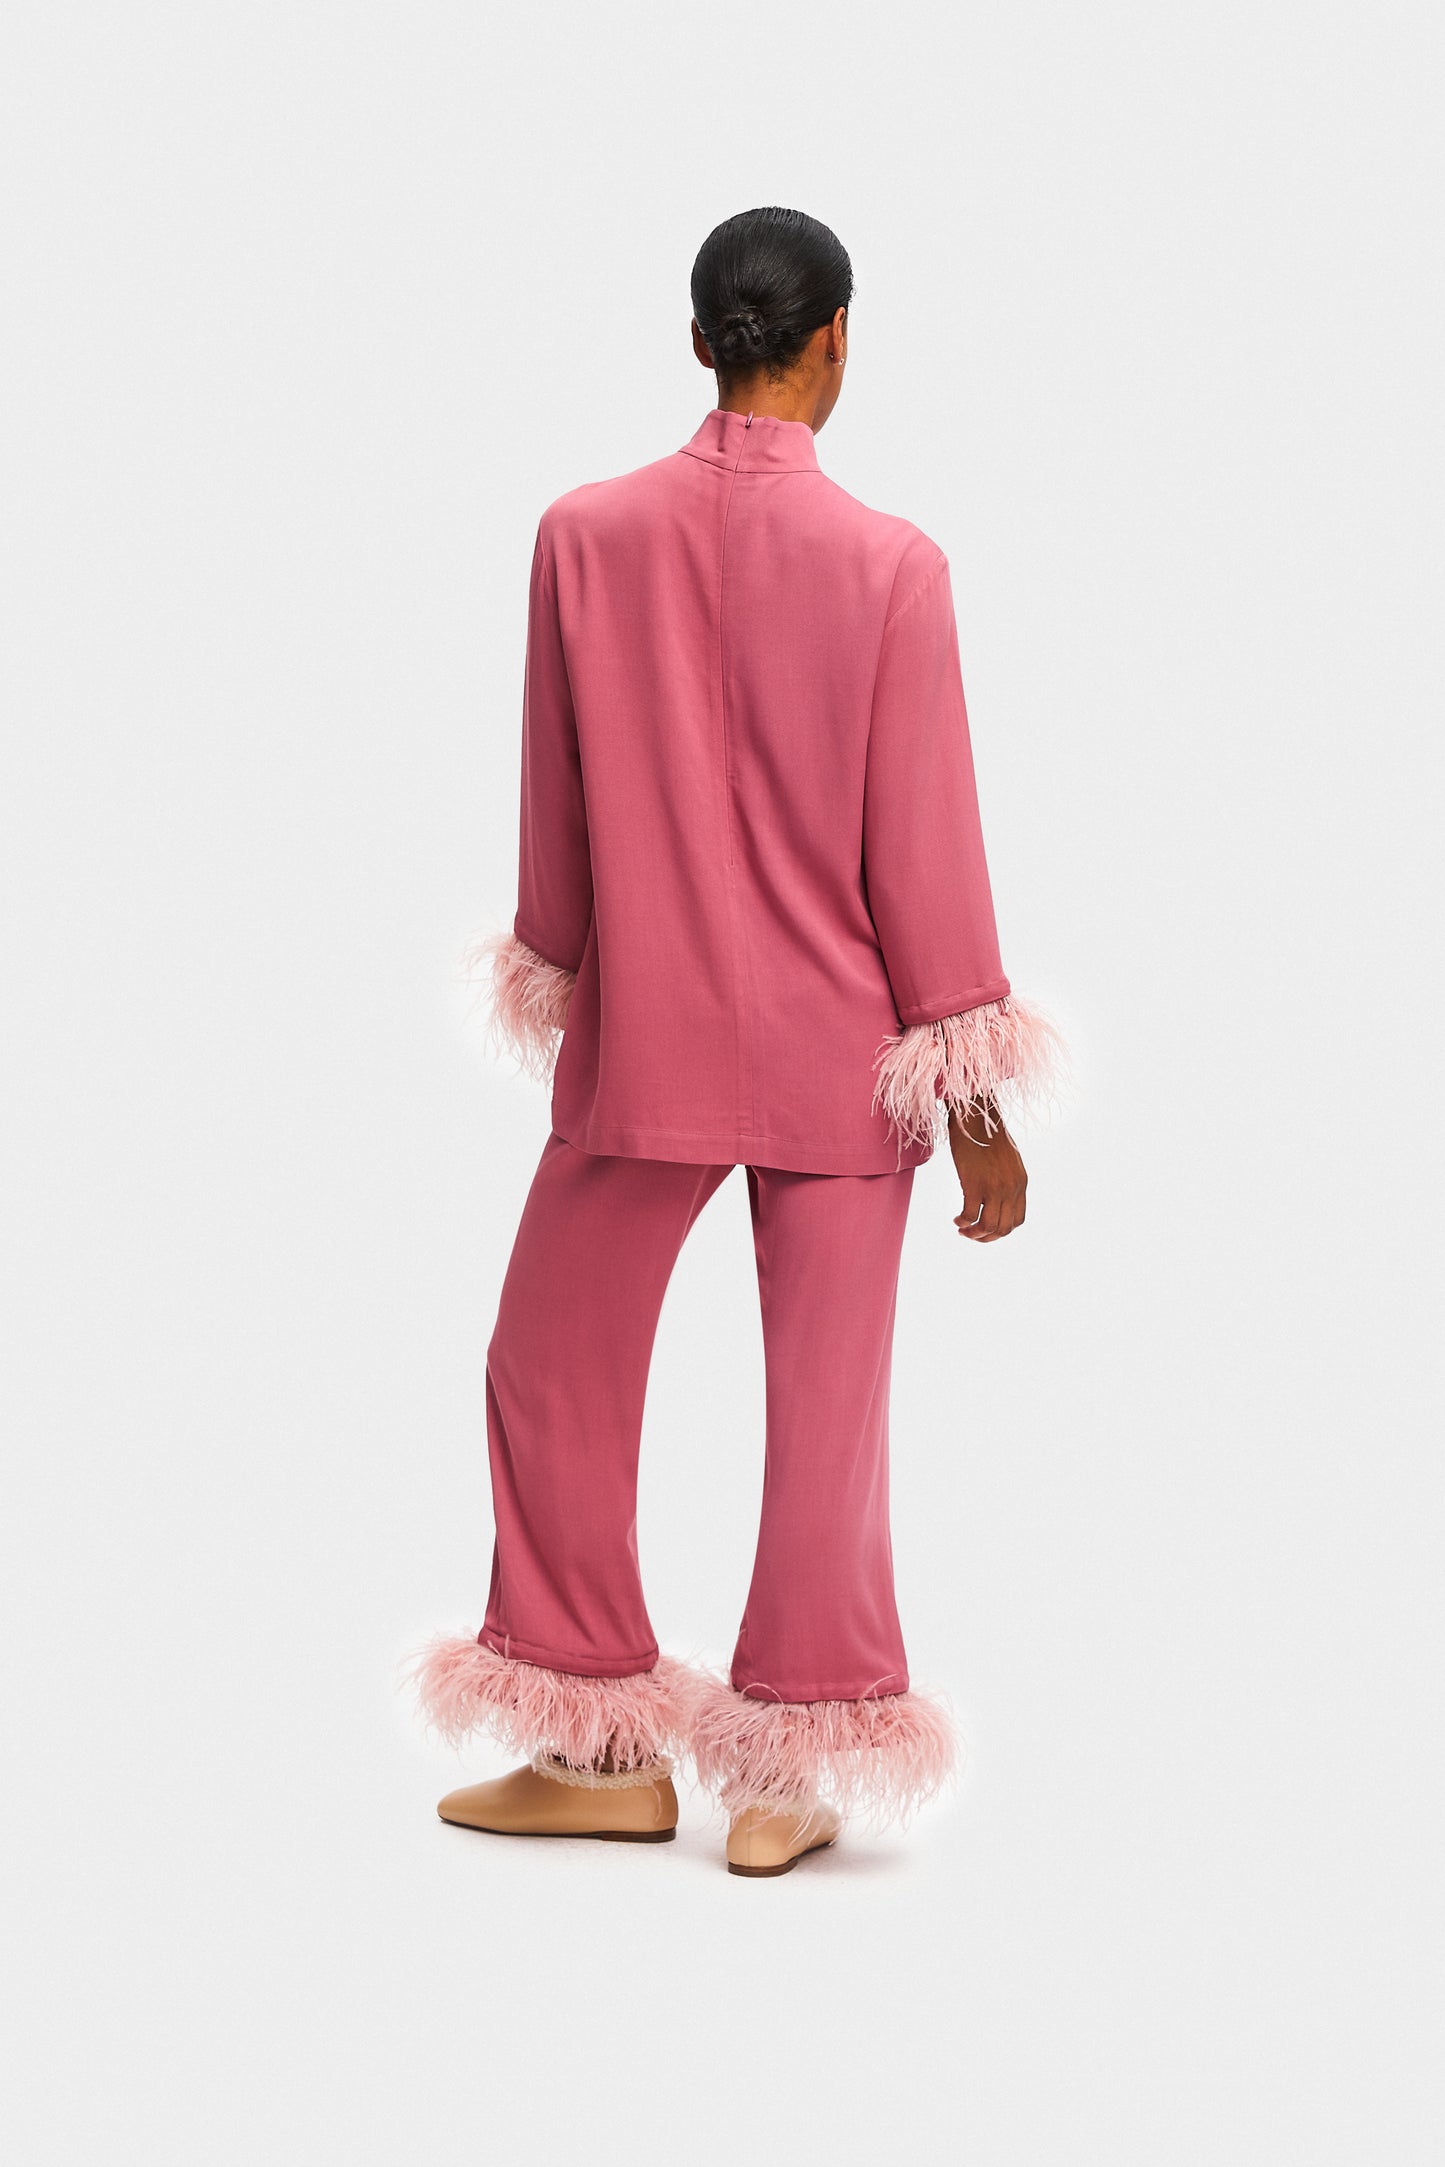 Black Tie Pajama with Detachable Feathers in Burgundy